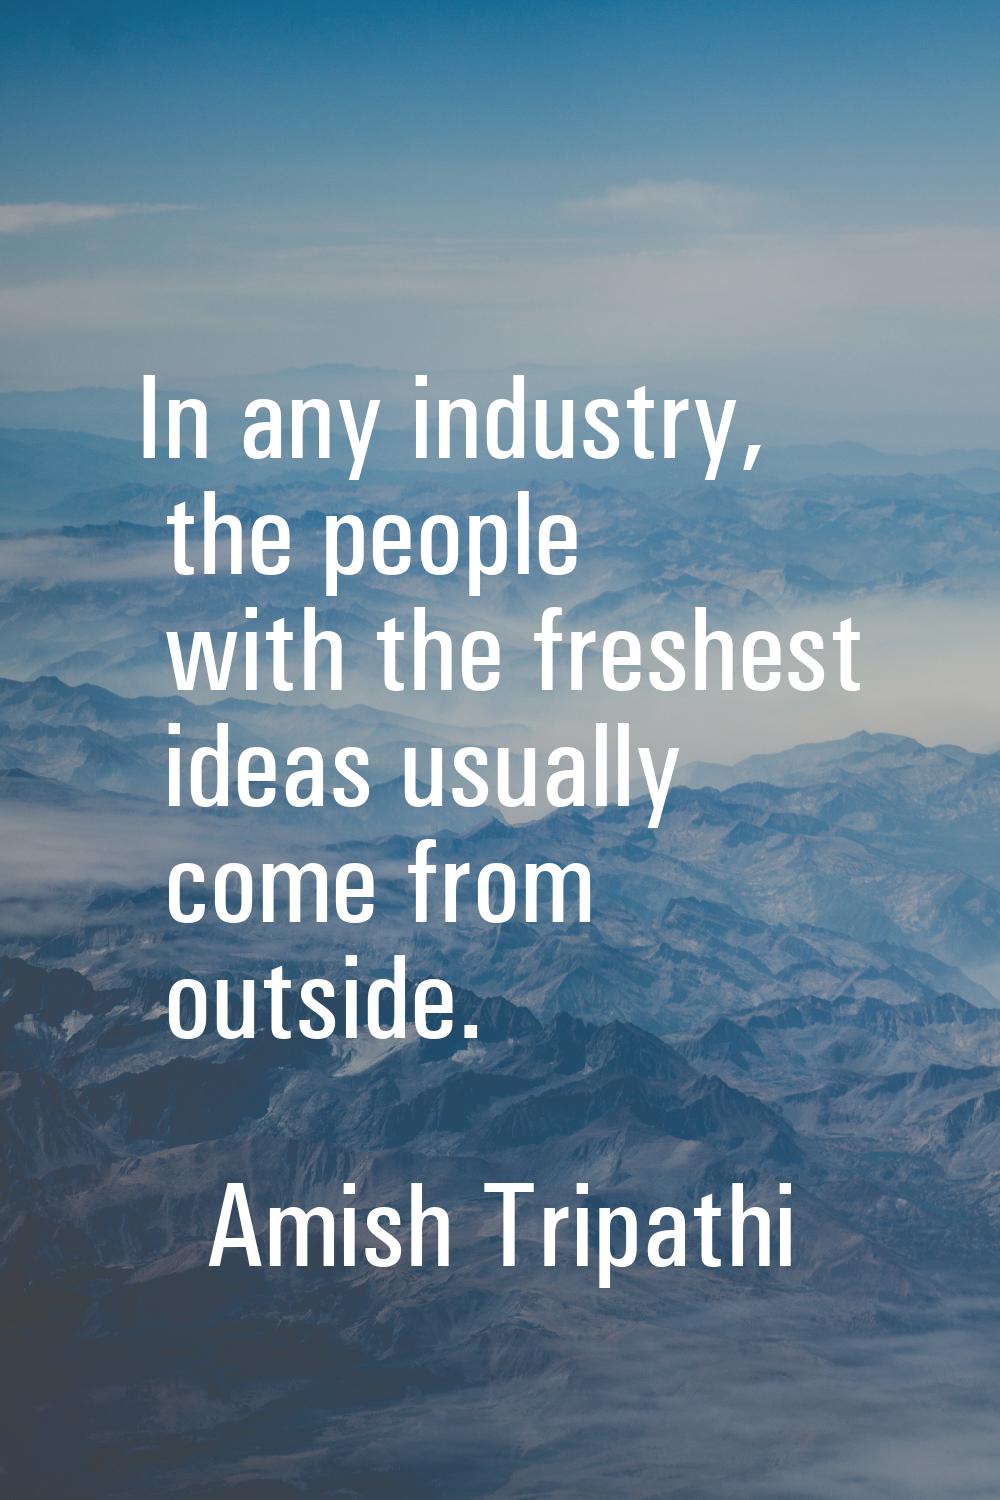 In any industry, the people with the freshest ideas usually come from outside.